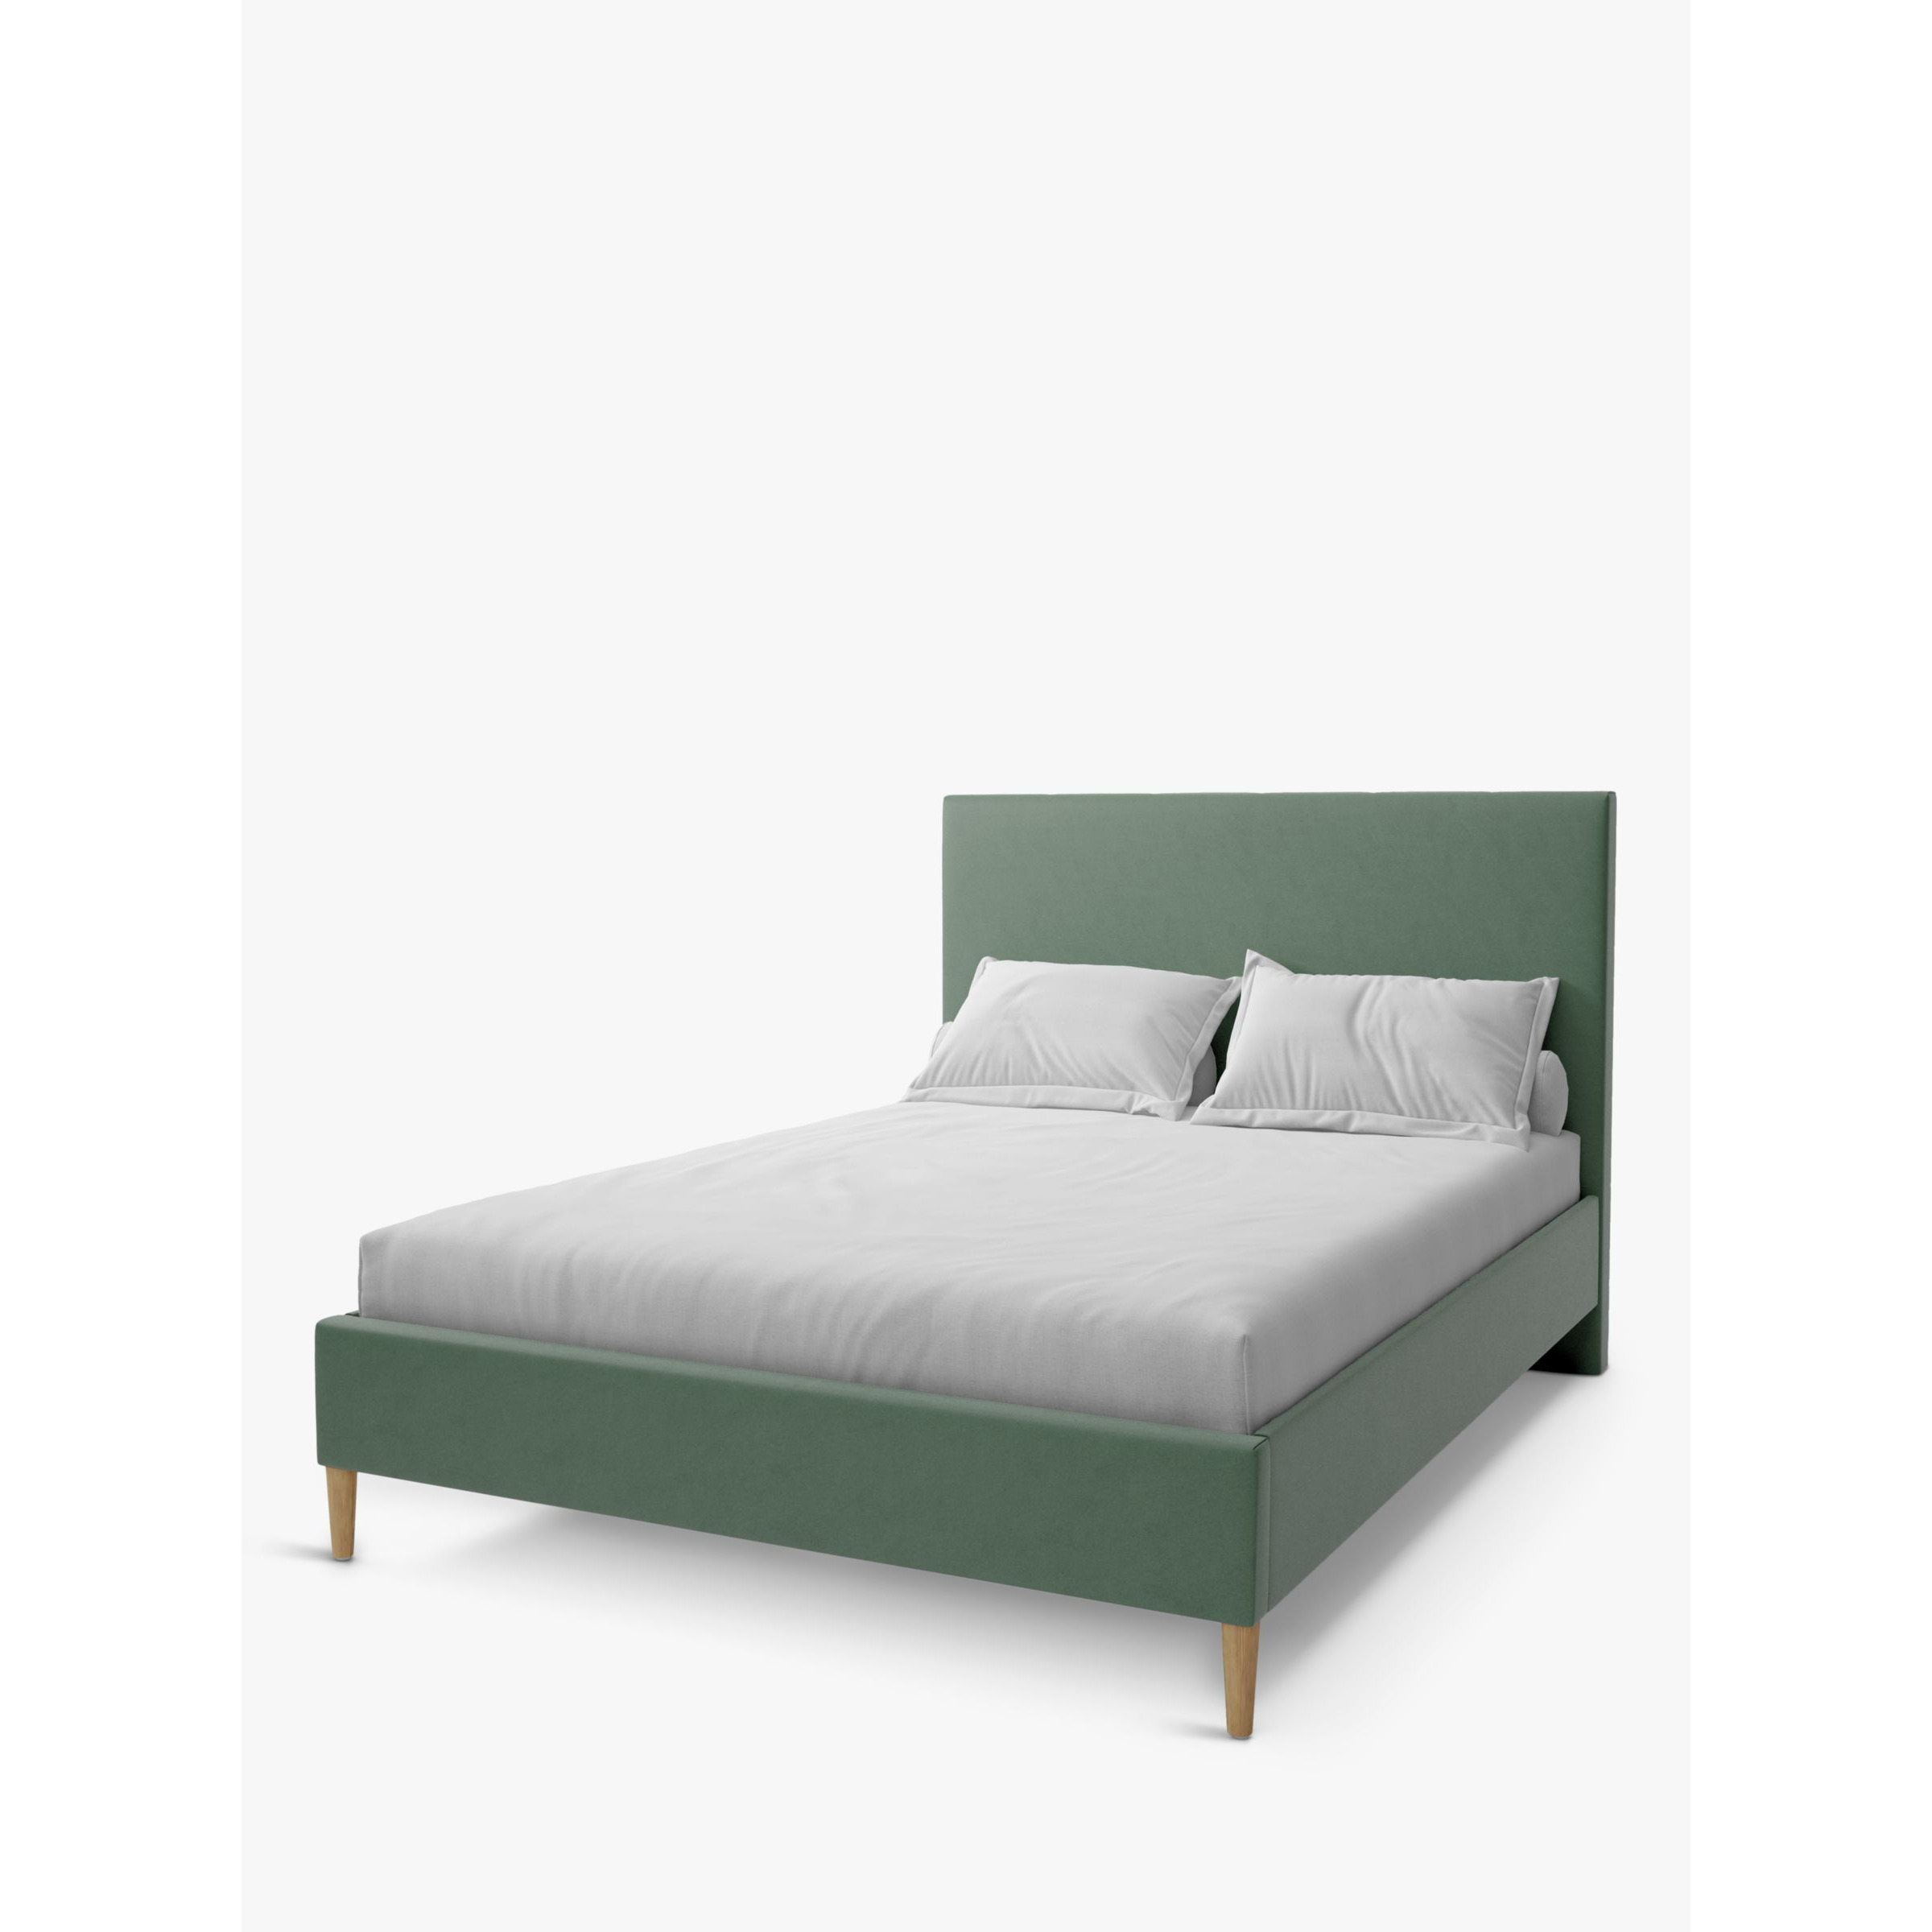 Koti Home Dee Upholstered Bed Frame, Double - image 1